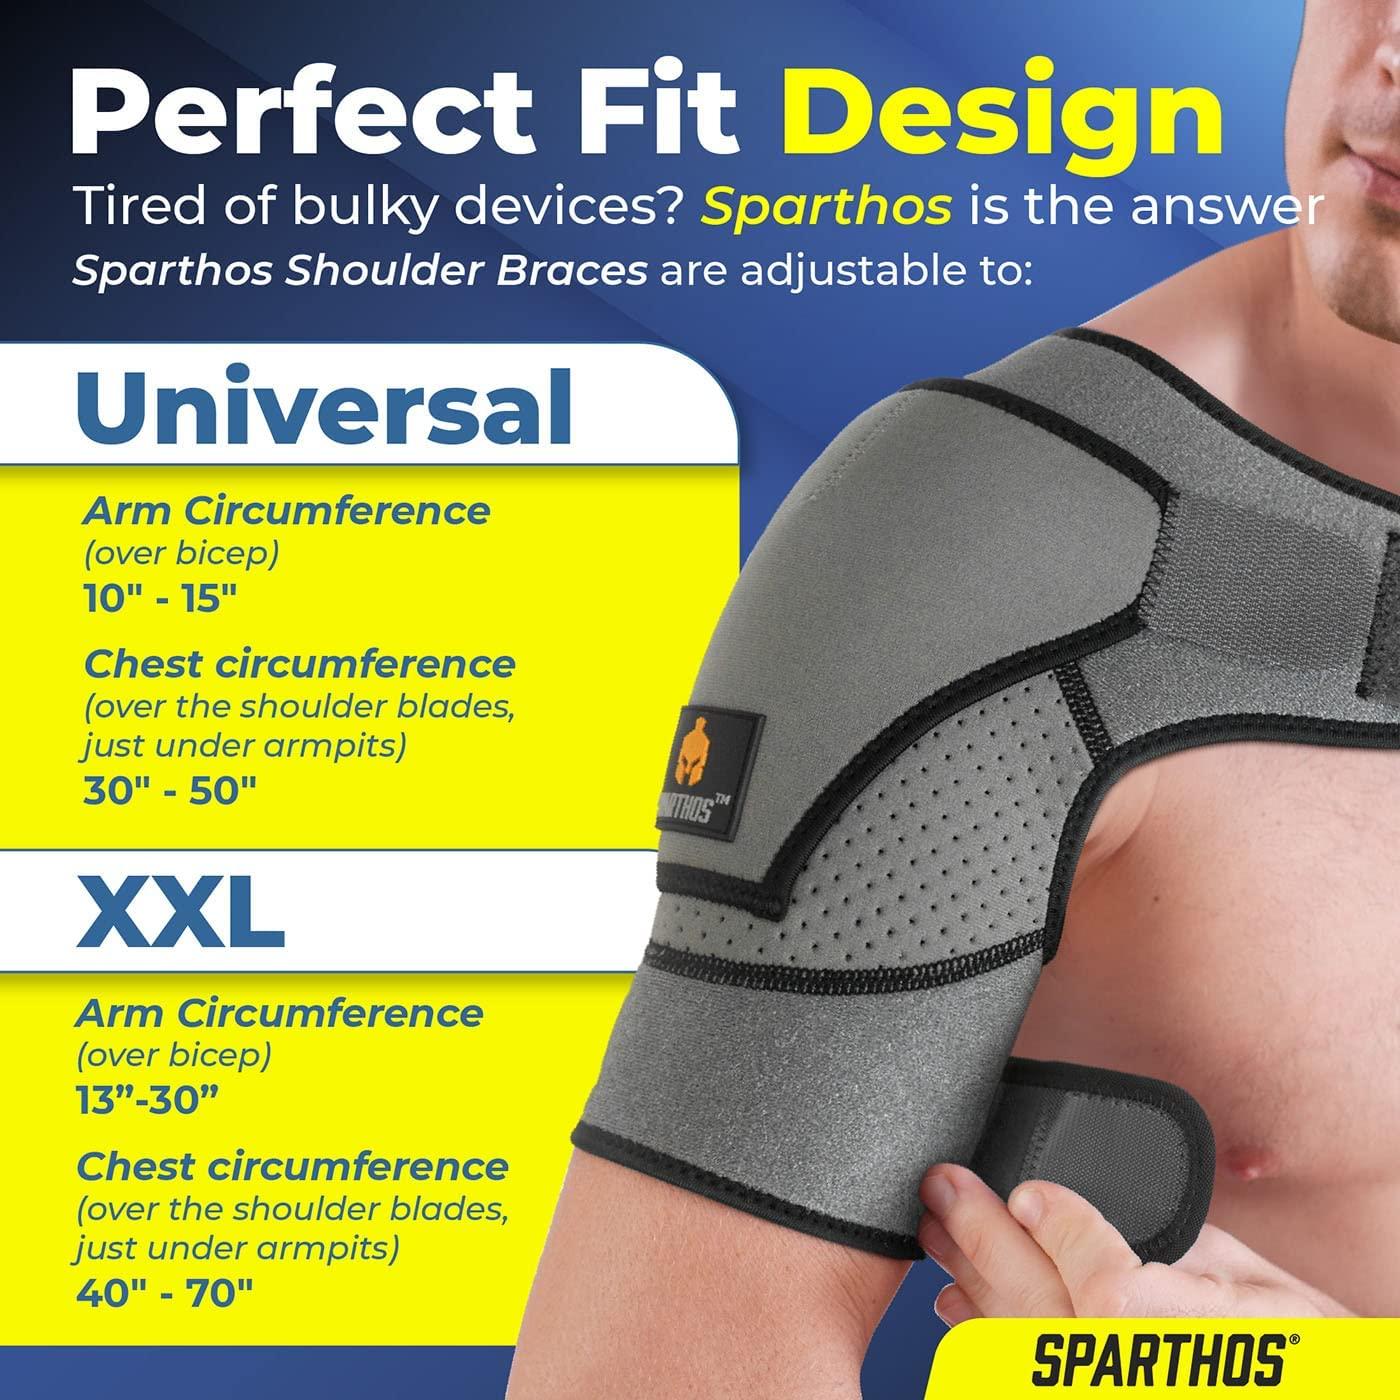 Shoulder Brace Support Compression Sleeves for Torn Rotator Cuff, AC Joint  Pain Relief Arm Immobilizer Wrap with Ice Pack Pocket - AliExpress